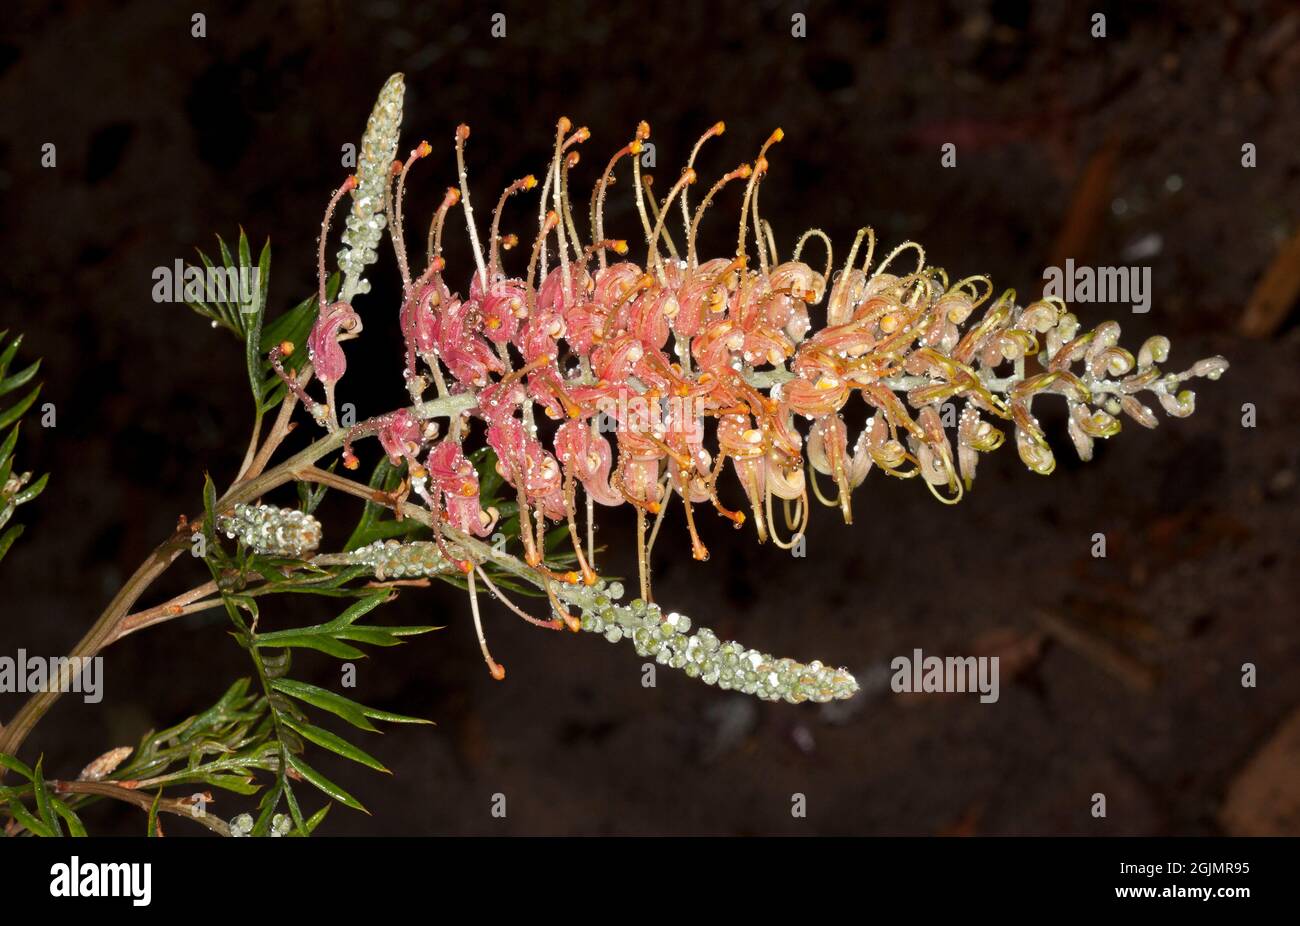 Large stunning red / pink flower of Grevillea 'Lemon Baby' with raindrops glinting on 'petals', with flower buds and green leaves, on dark background Stock Photo